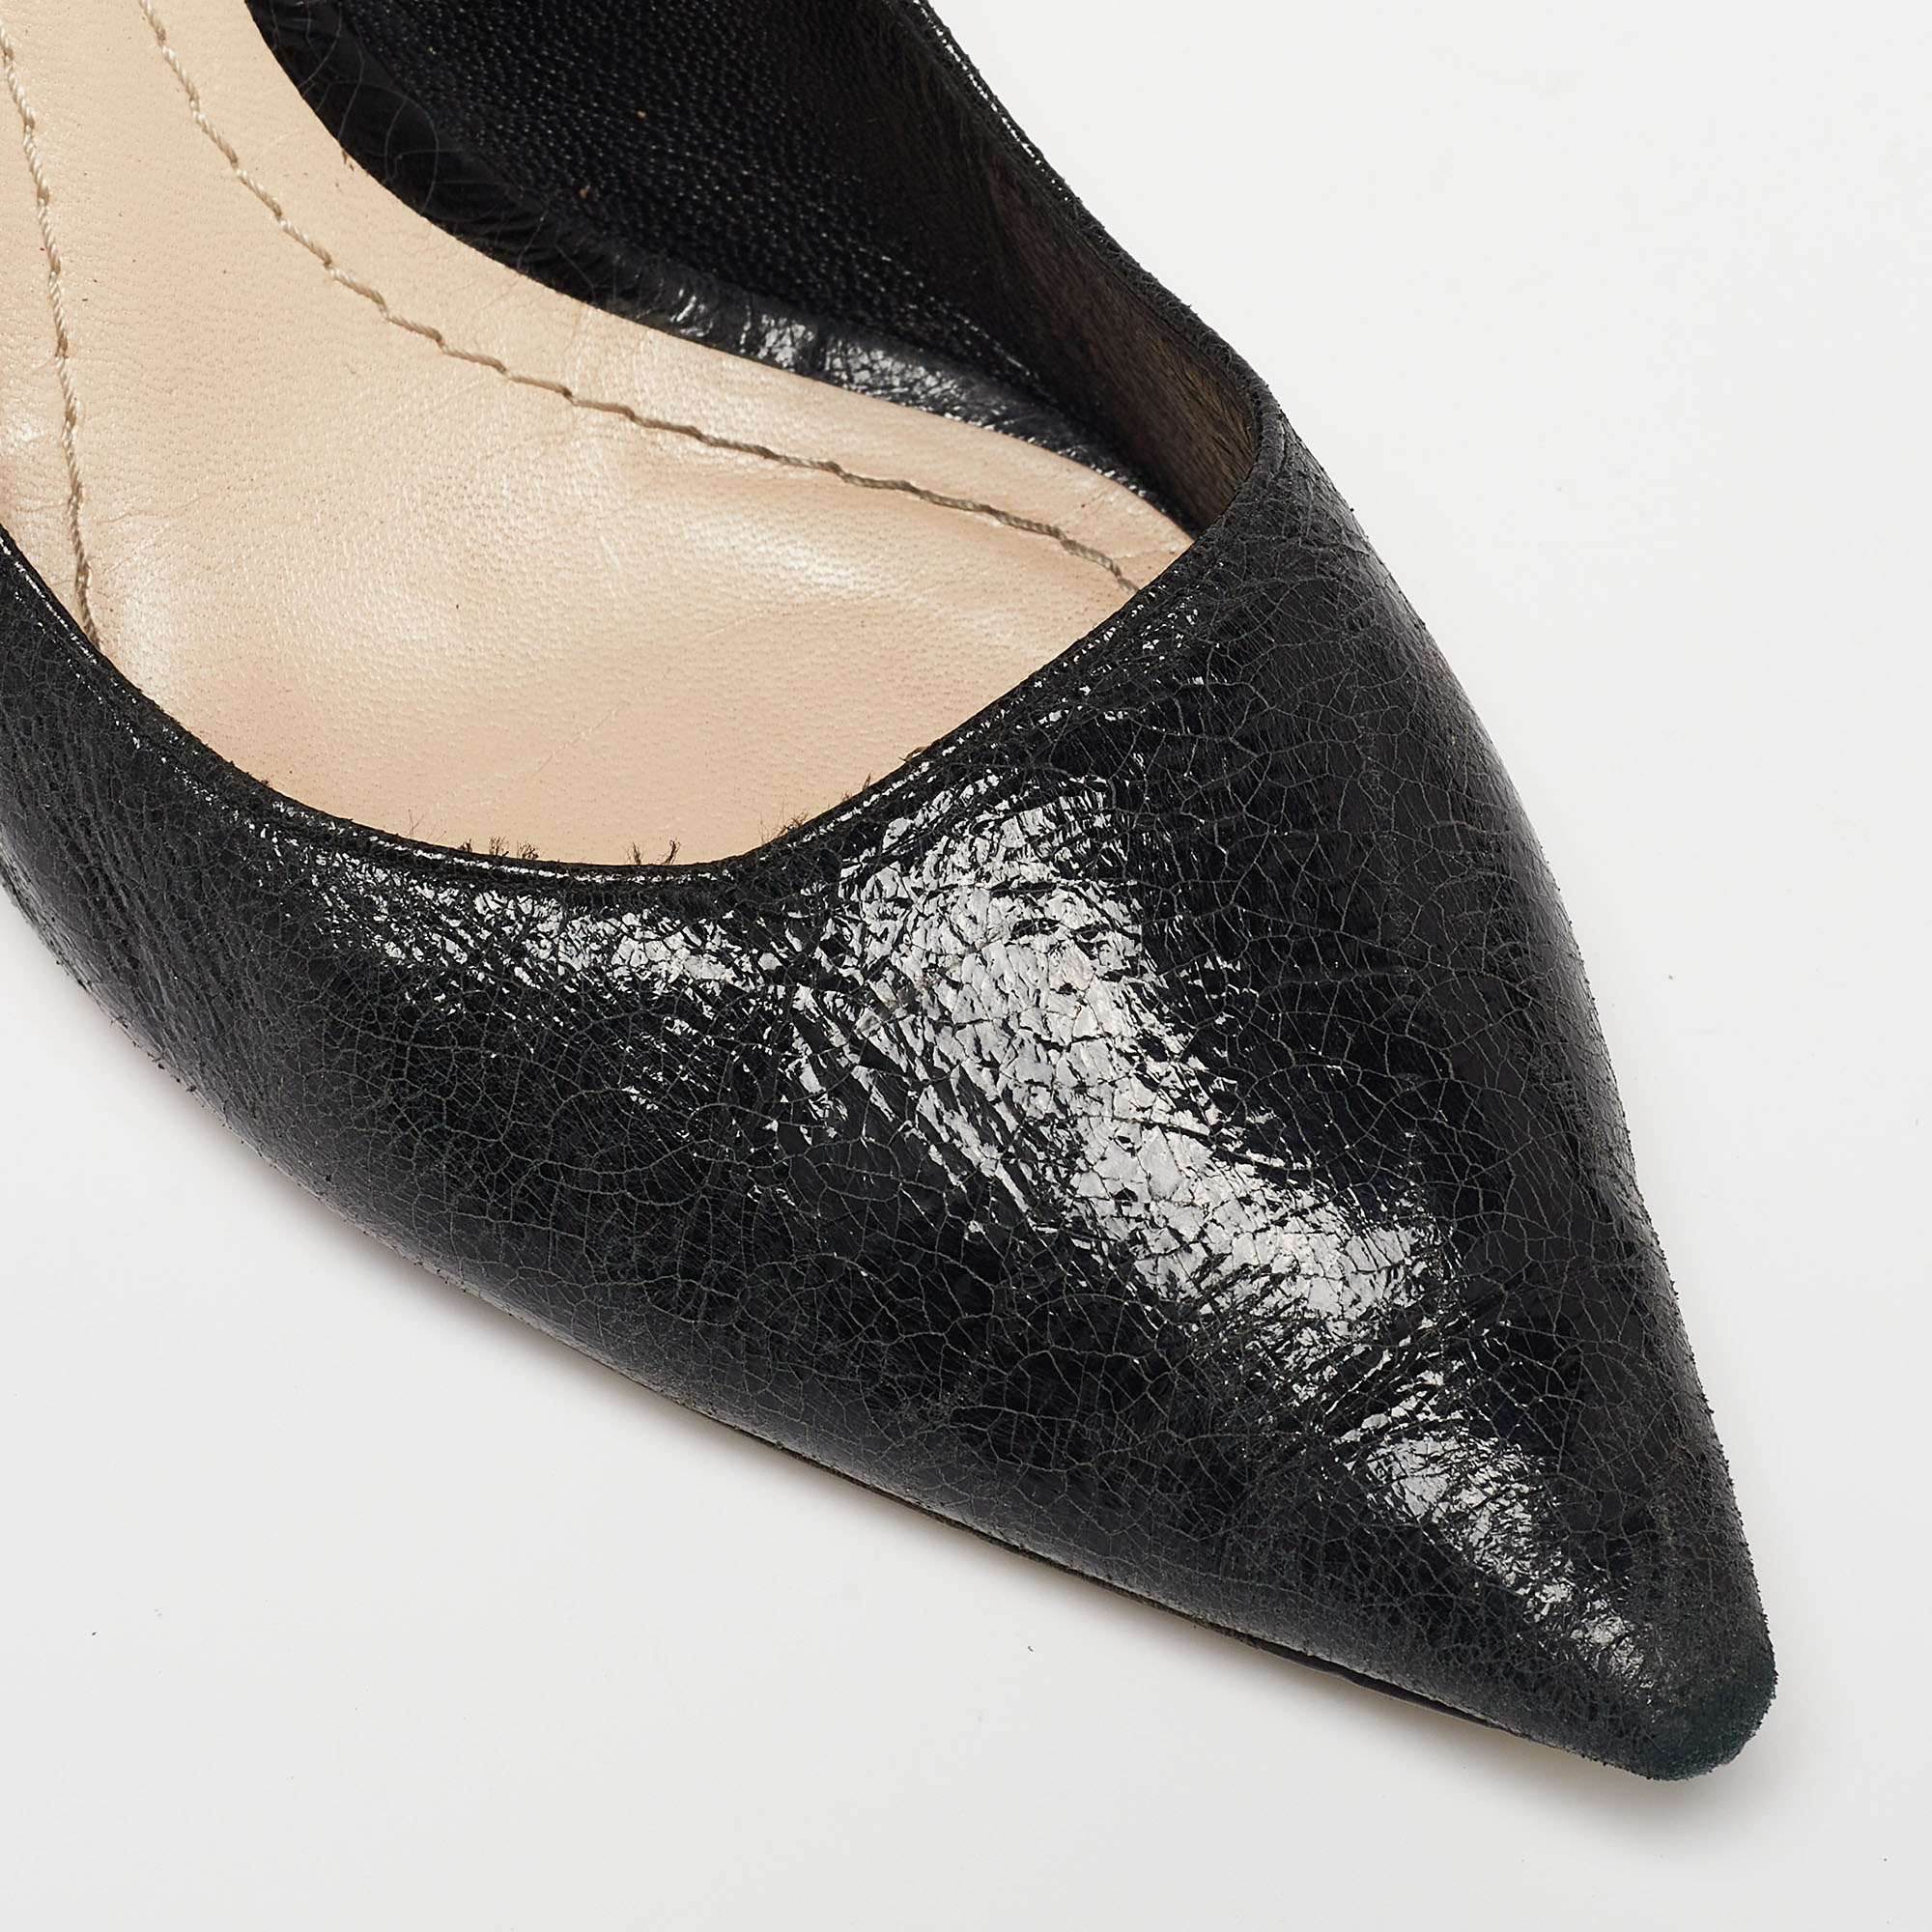 Dior Black Crackled Leather Pointed Toe Pumps Size 39